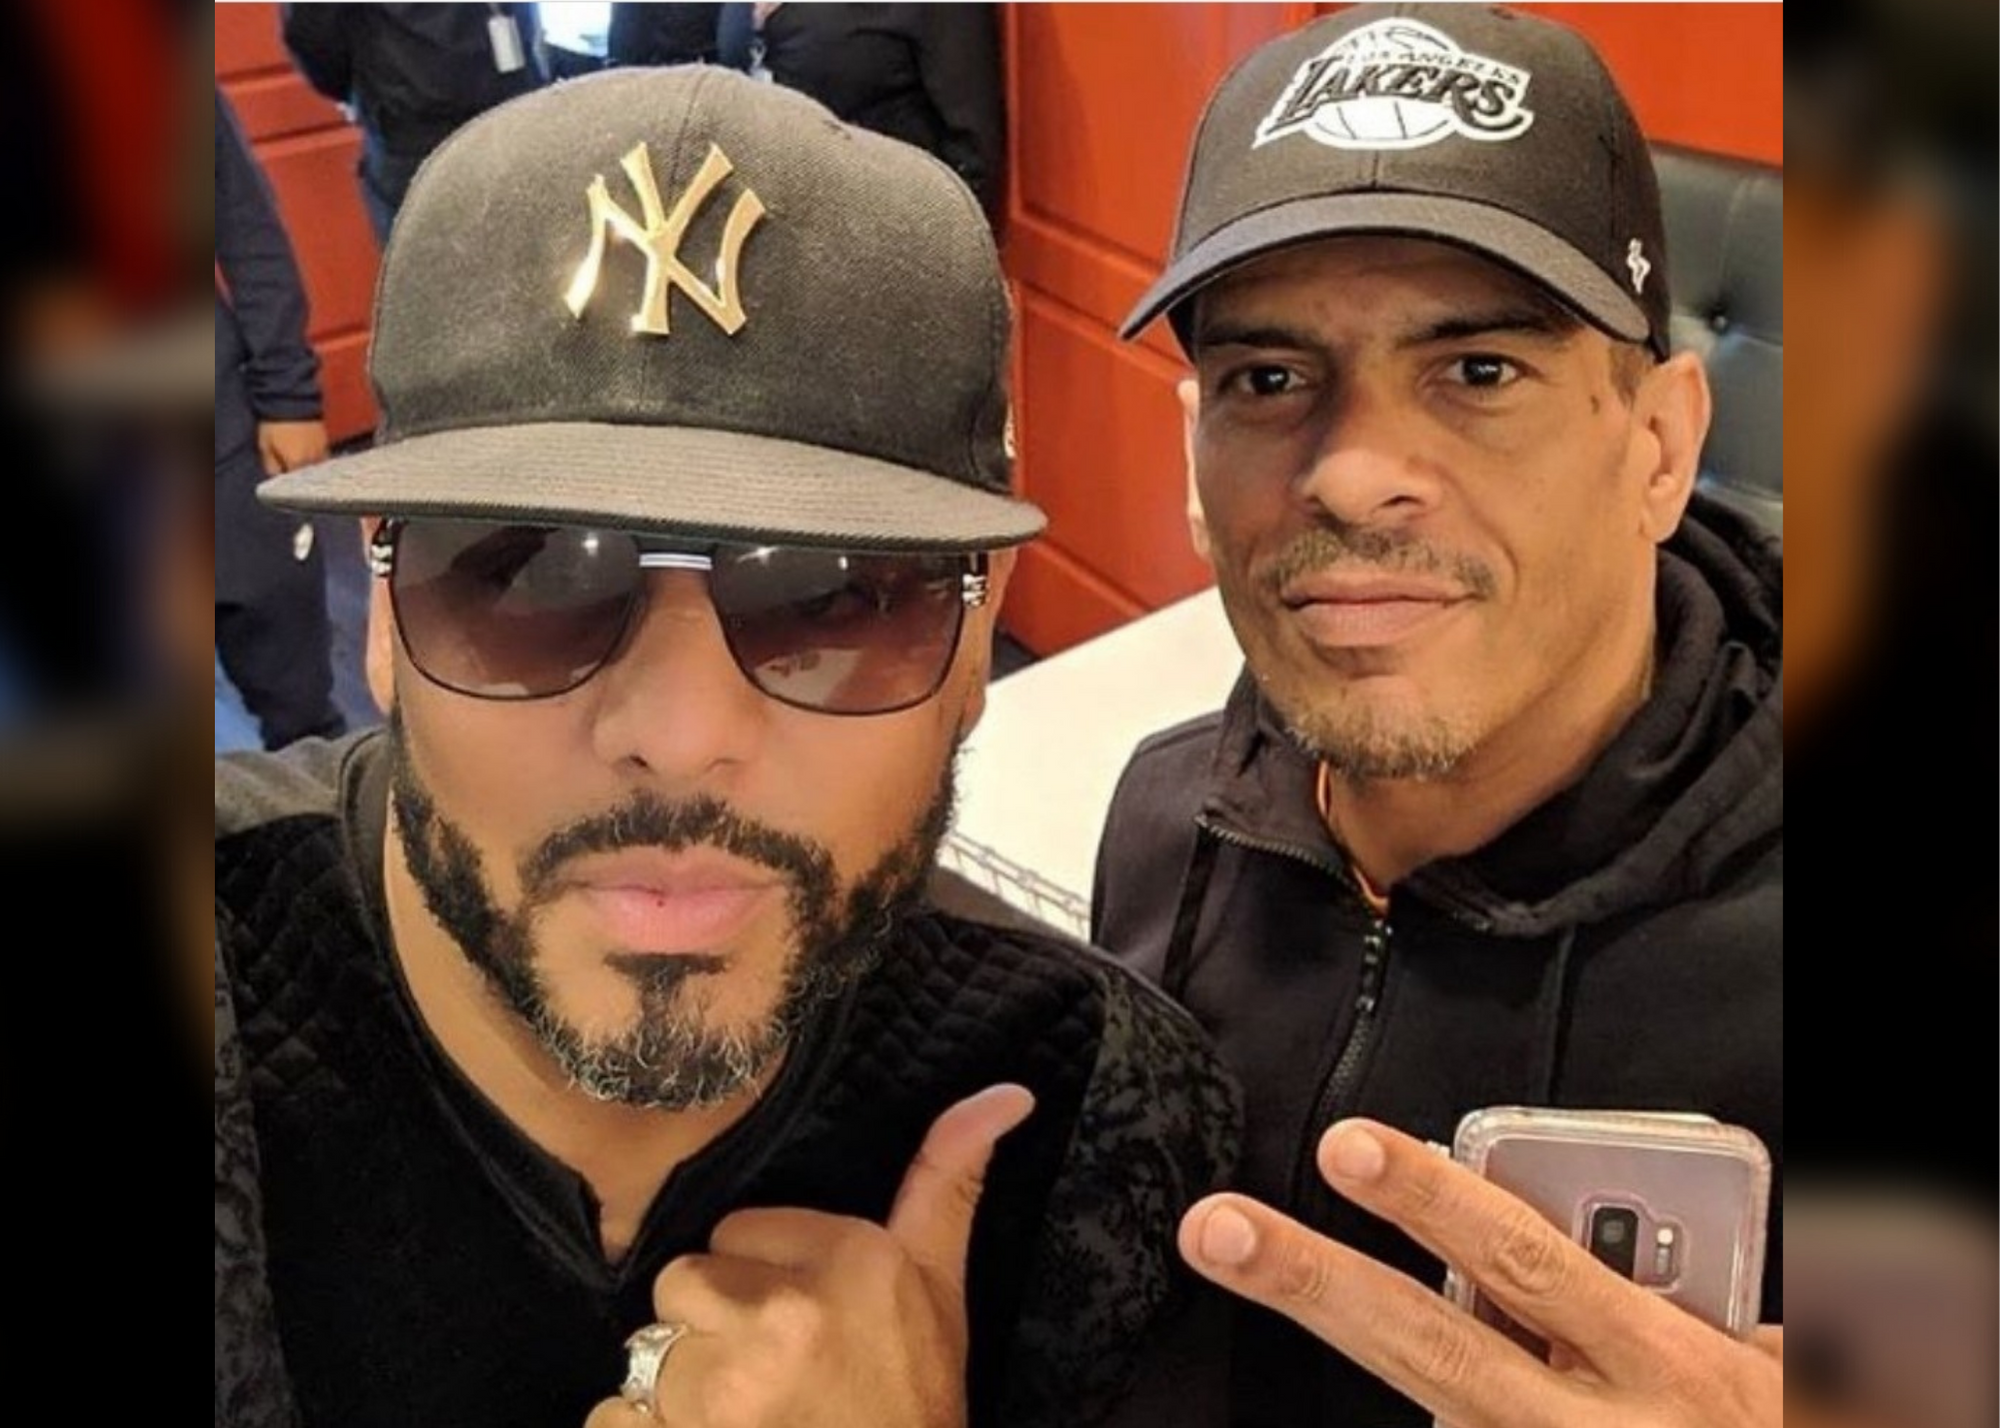 UPDATE: Singer Christopher Williams Is NOT In A Coma, According To His Instagram Post